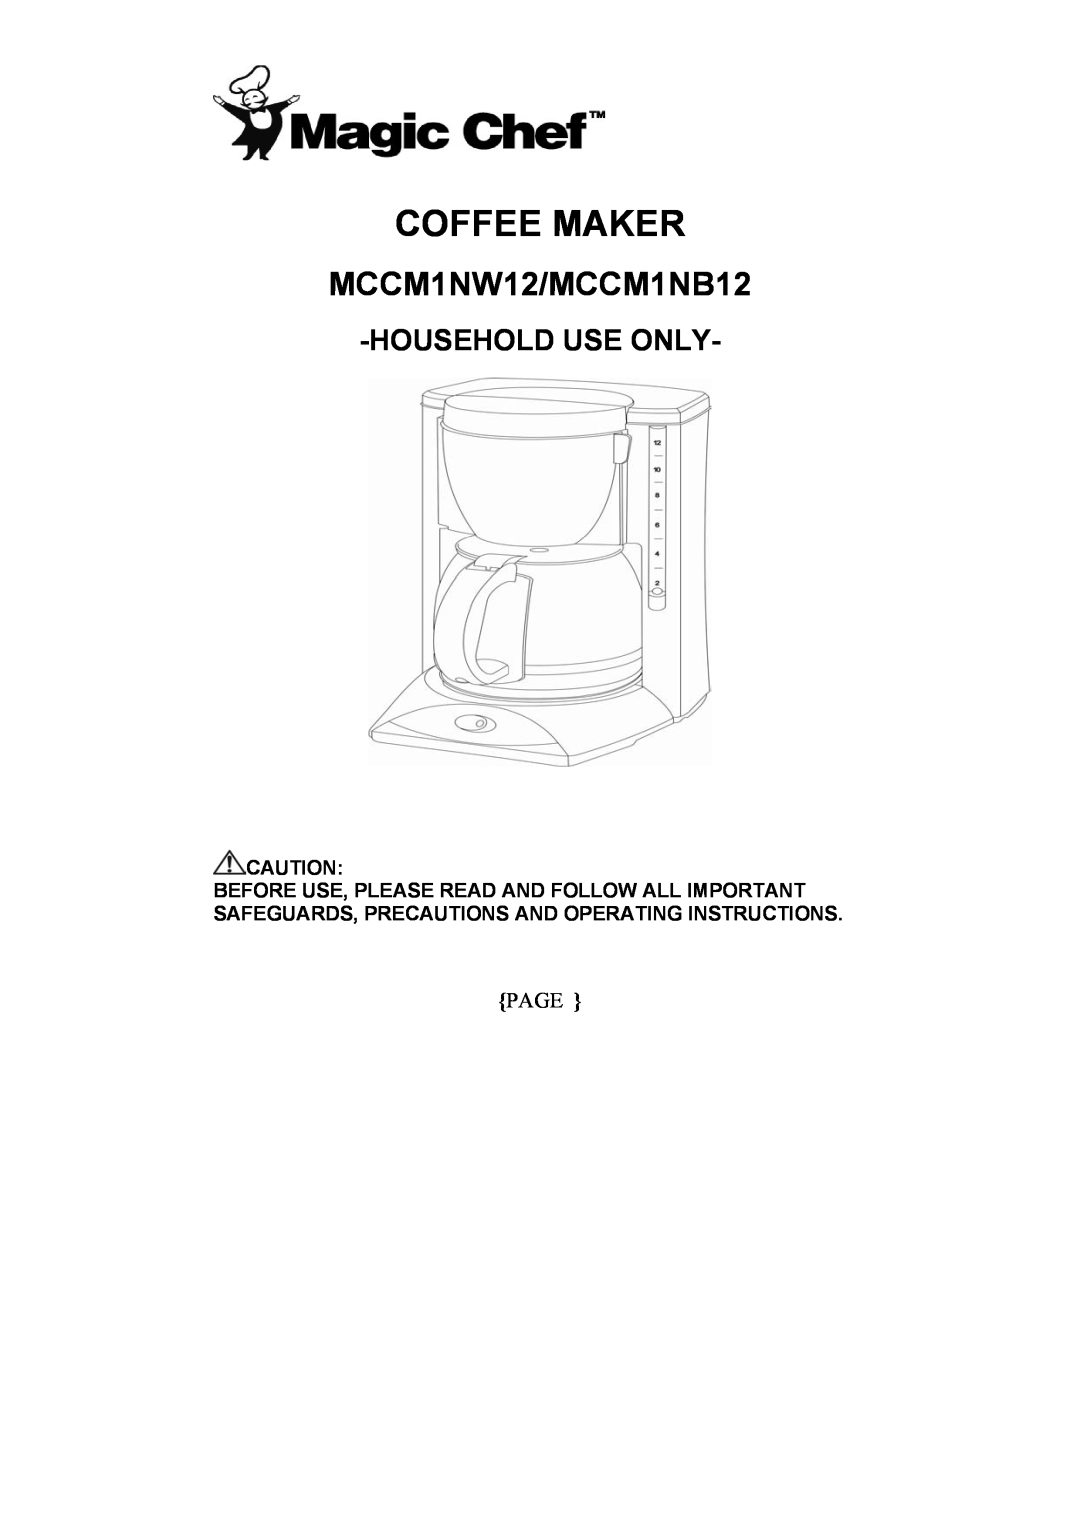 Magic Chef manual Coffee Maker, MCCM1NW12/MCCM1NB12, Household Use Only, Page 